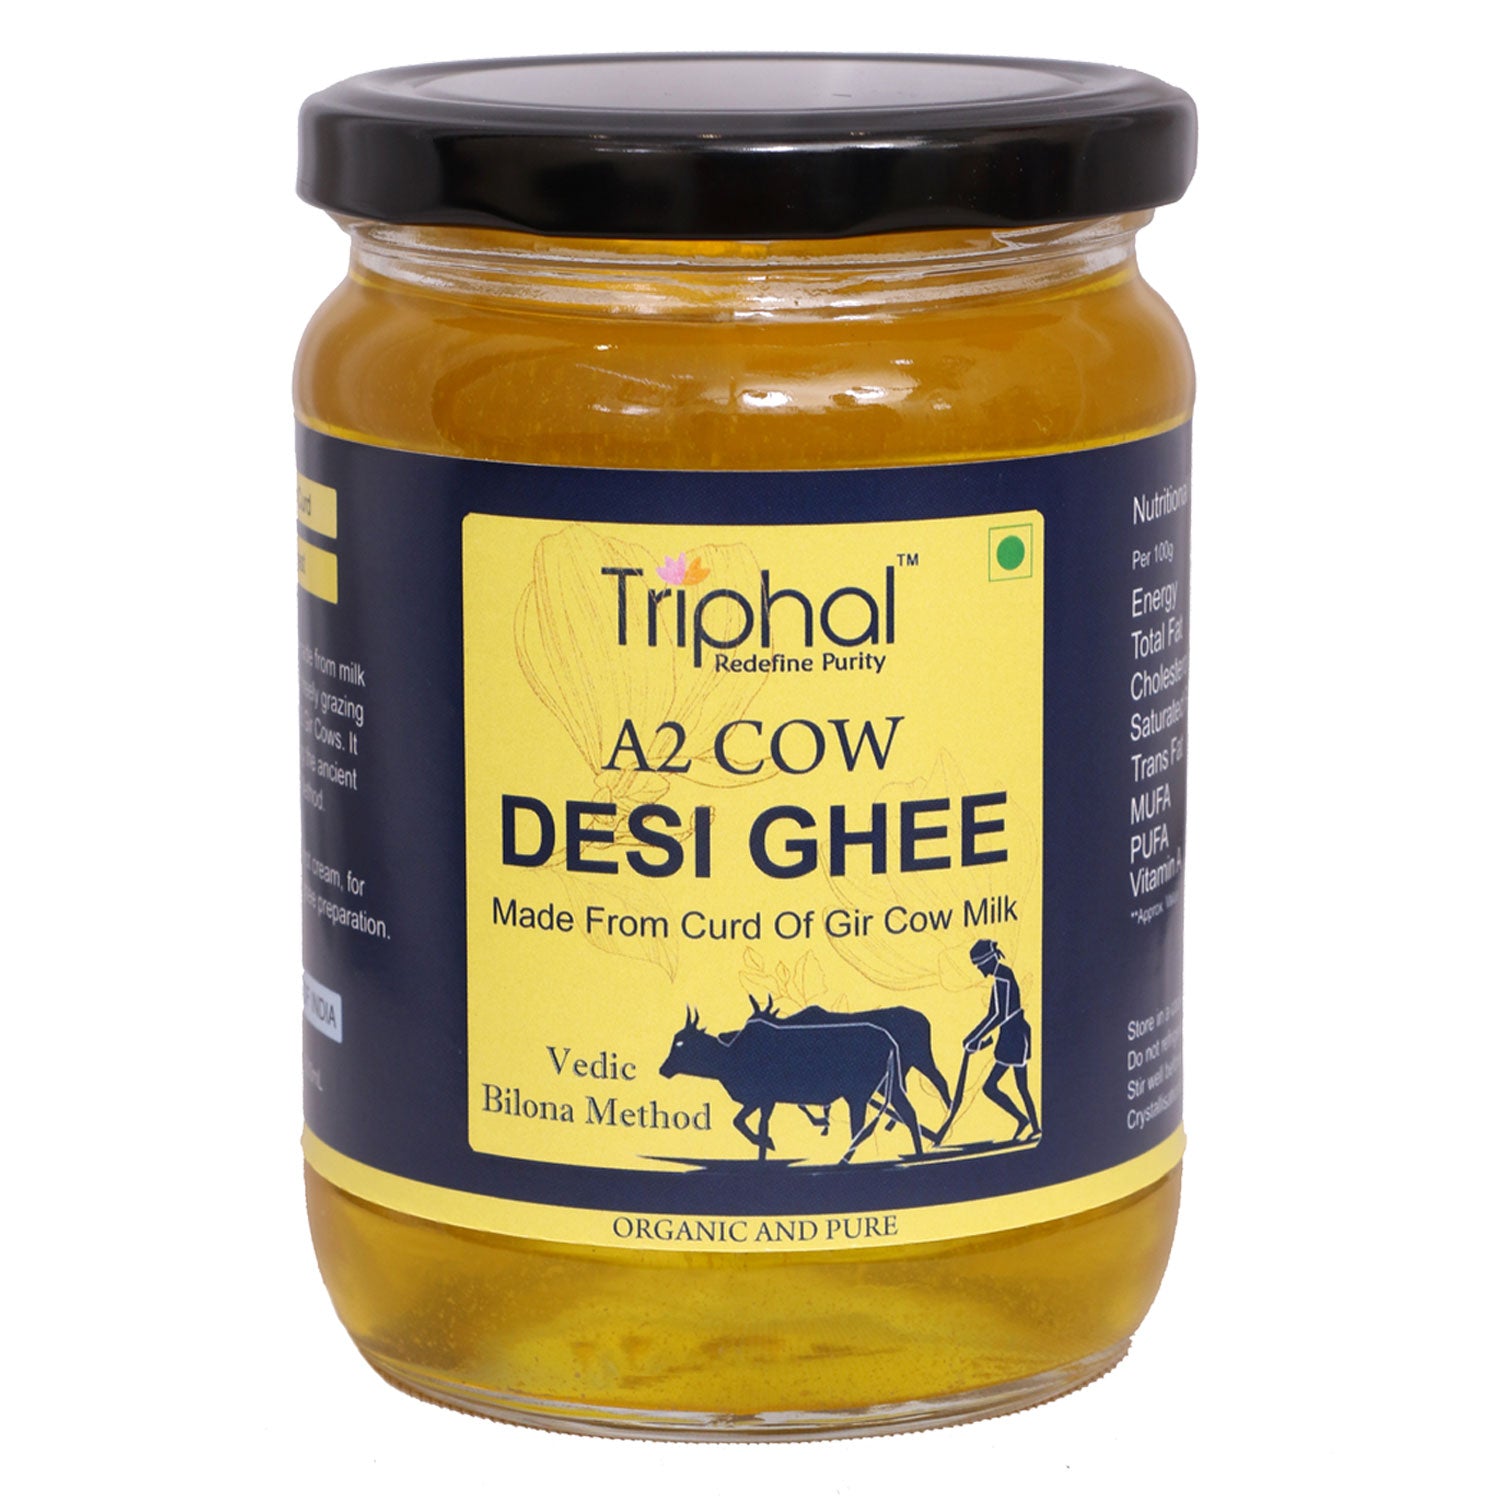 A2 Gir Cow Desi Ghee by Triphal Brand - Fresh Oragnic and Pure Ghee For Taste and wellbeing